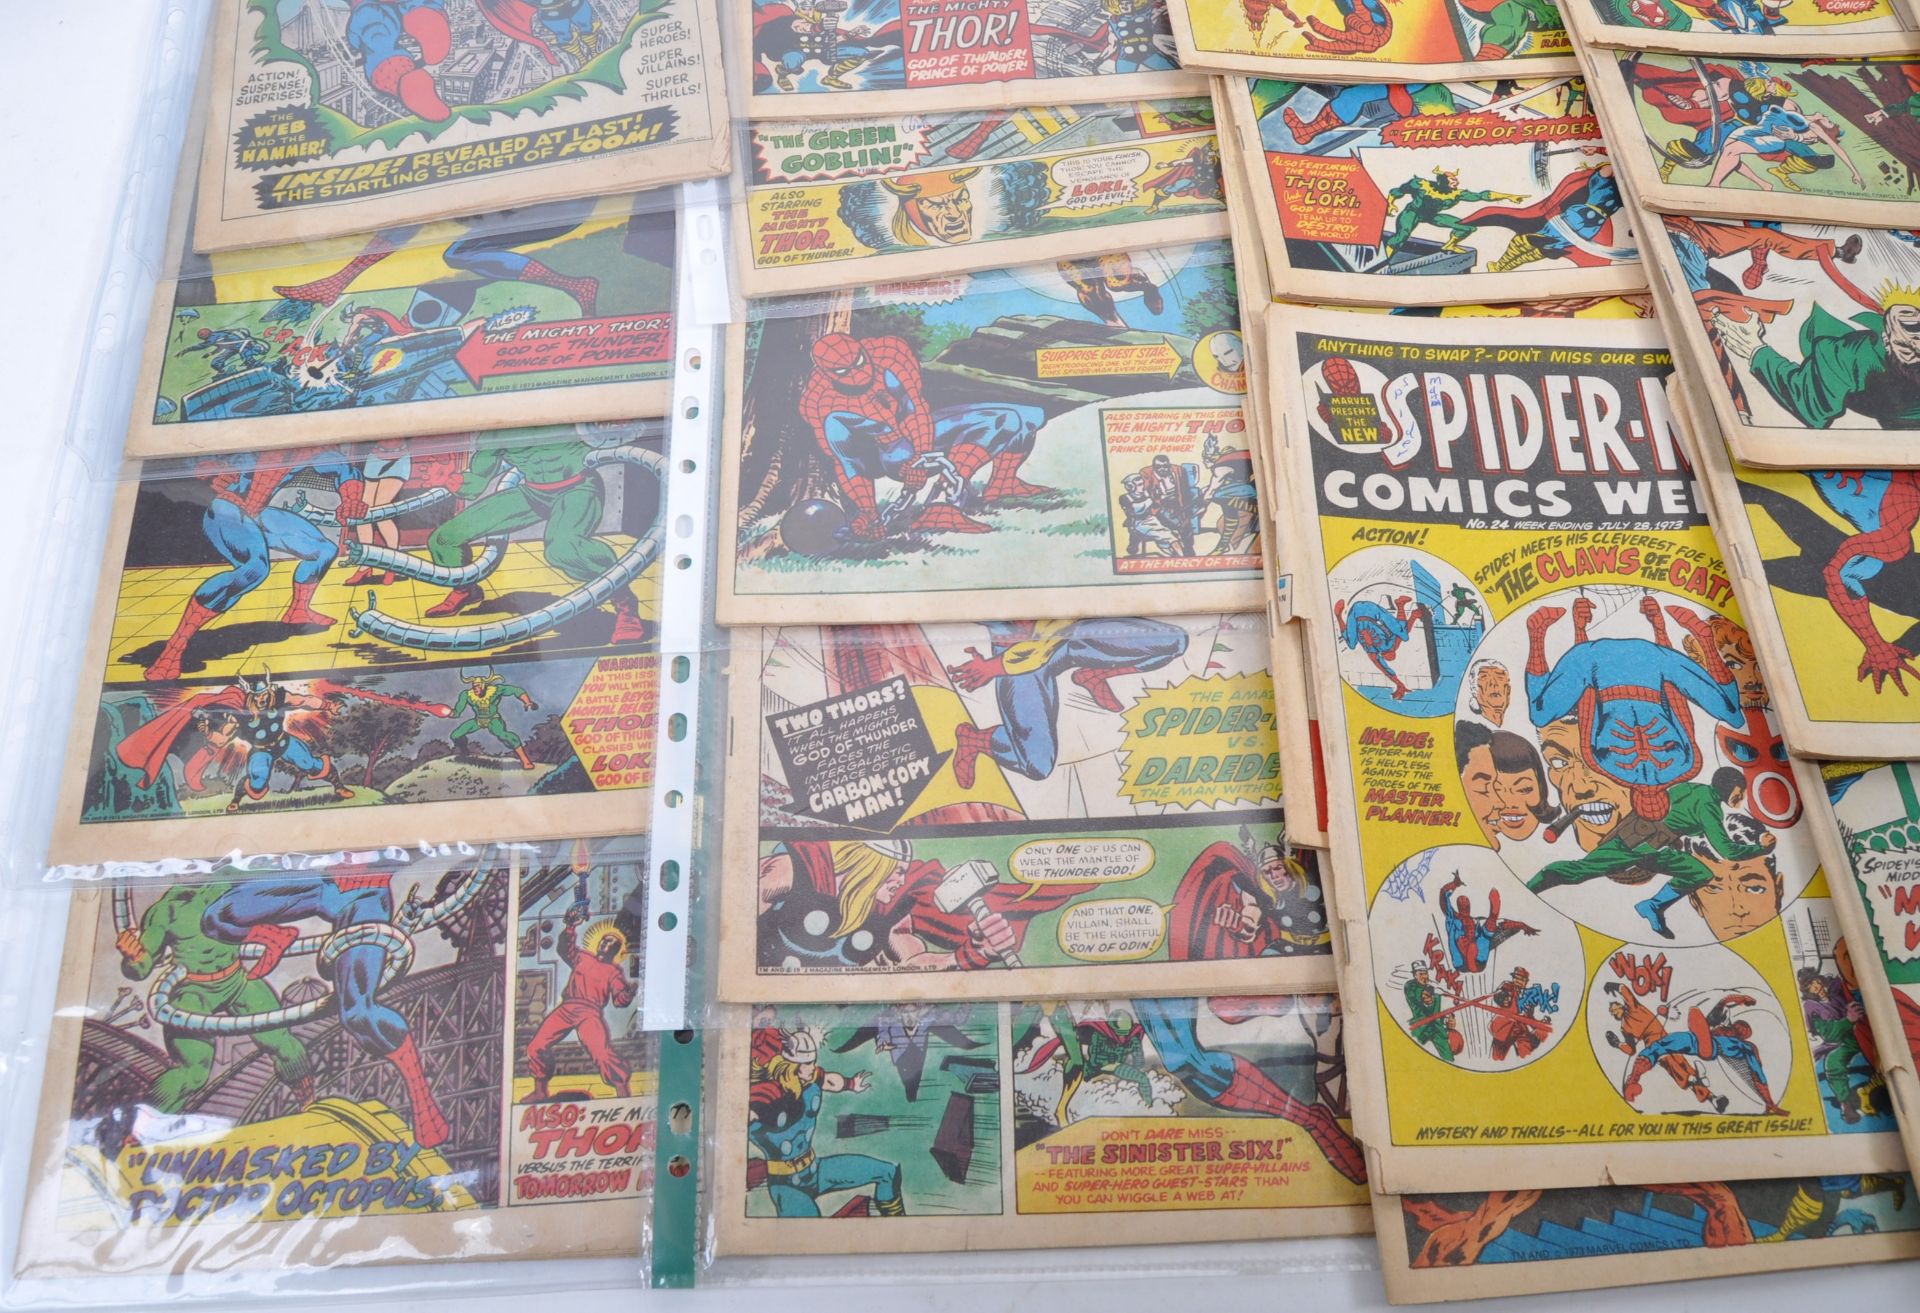 VINTAGE COMIC BOOKS - NEAR COMPLETE RUN OF SPIDER-MAN COMICS WEEKLY - Image 6 of 10